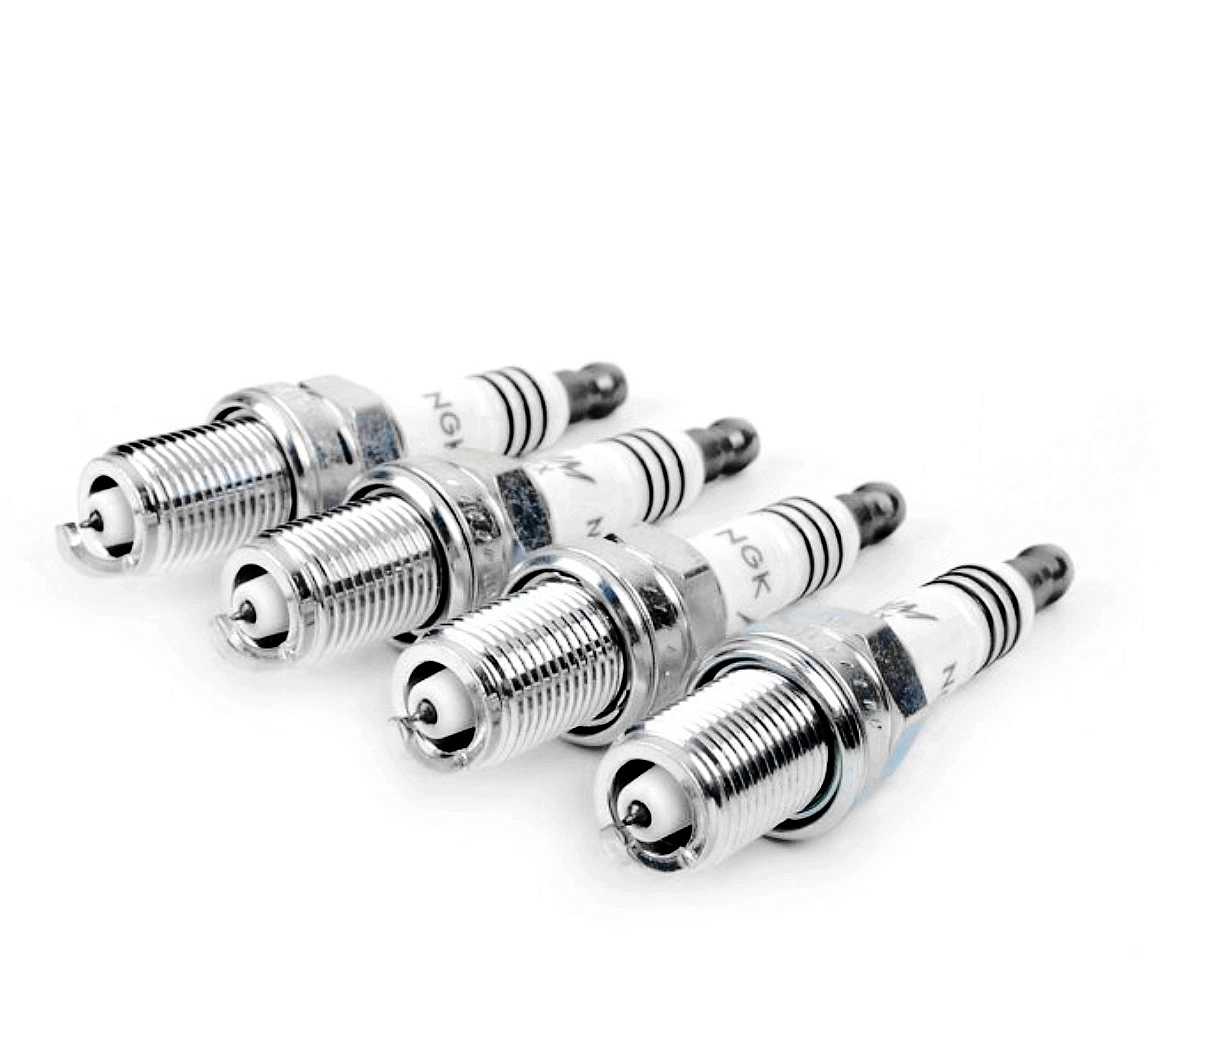 NGK upgrade Spark plugs suitable for Toyota GT86 & Subaru BRZ FA20